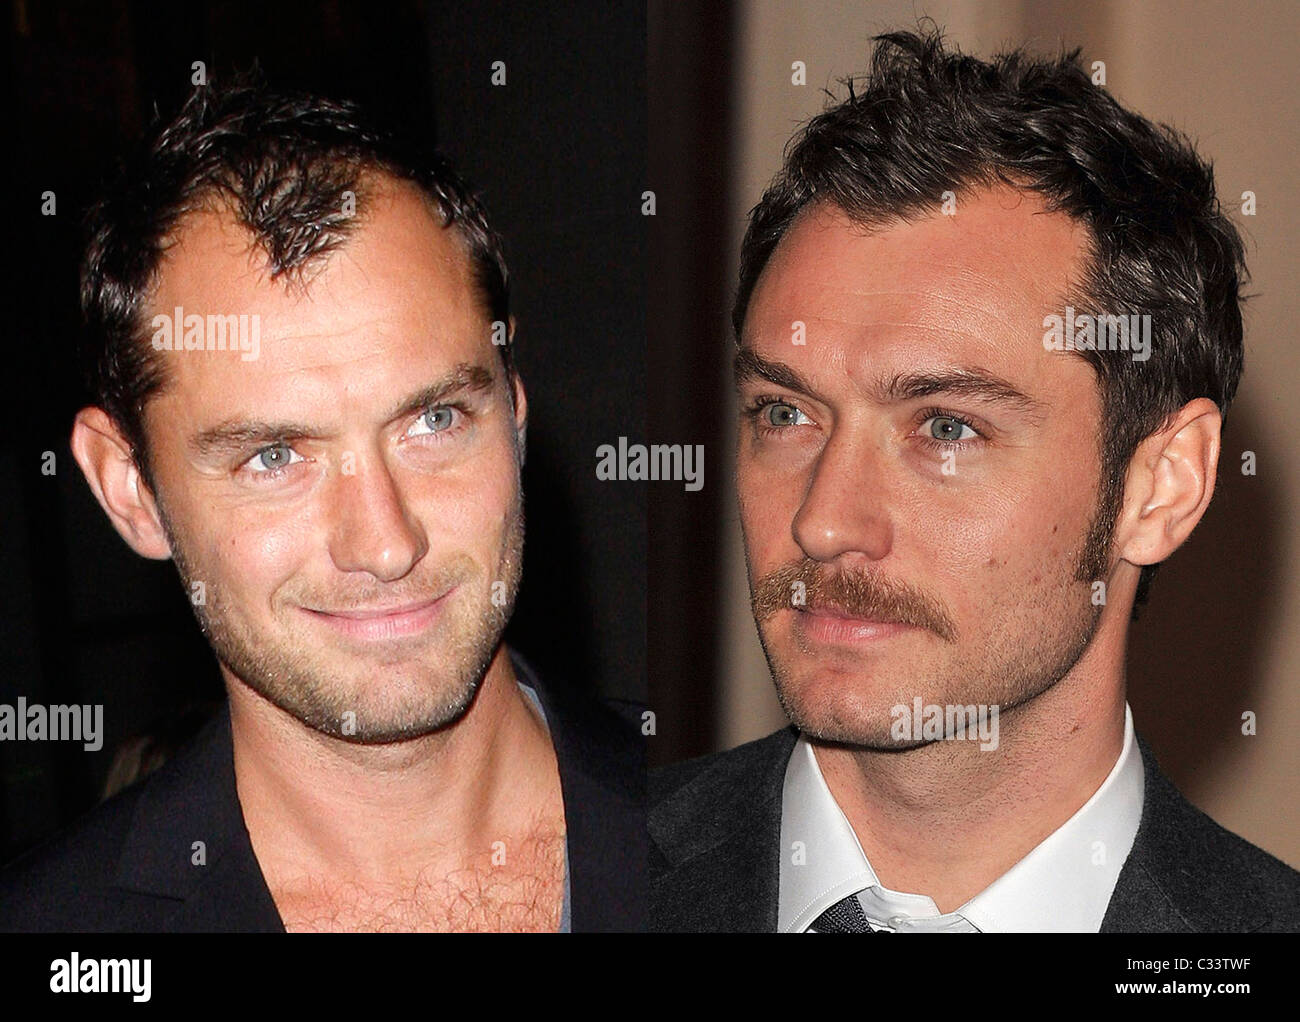 LAW'S HAIR-RAISING NEW 'DO Actor JUDE LAW is turning heads with a shocking new  hairstyle - that seems to have grown Stock Photo - Alamy